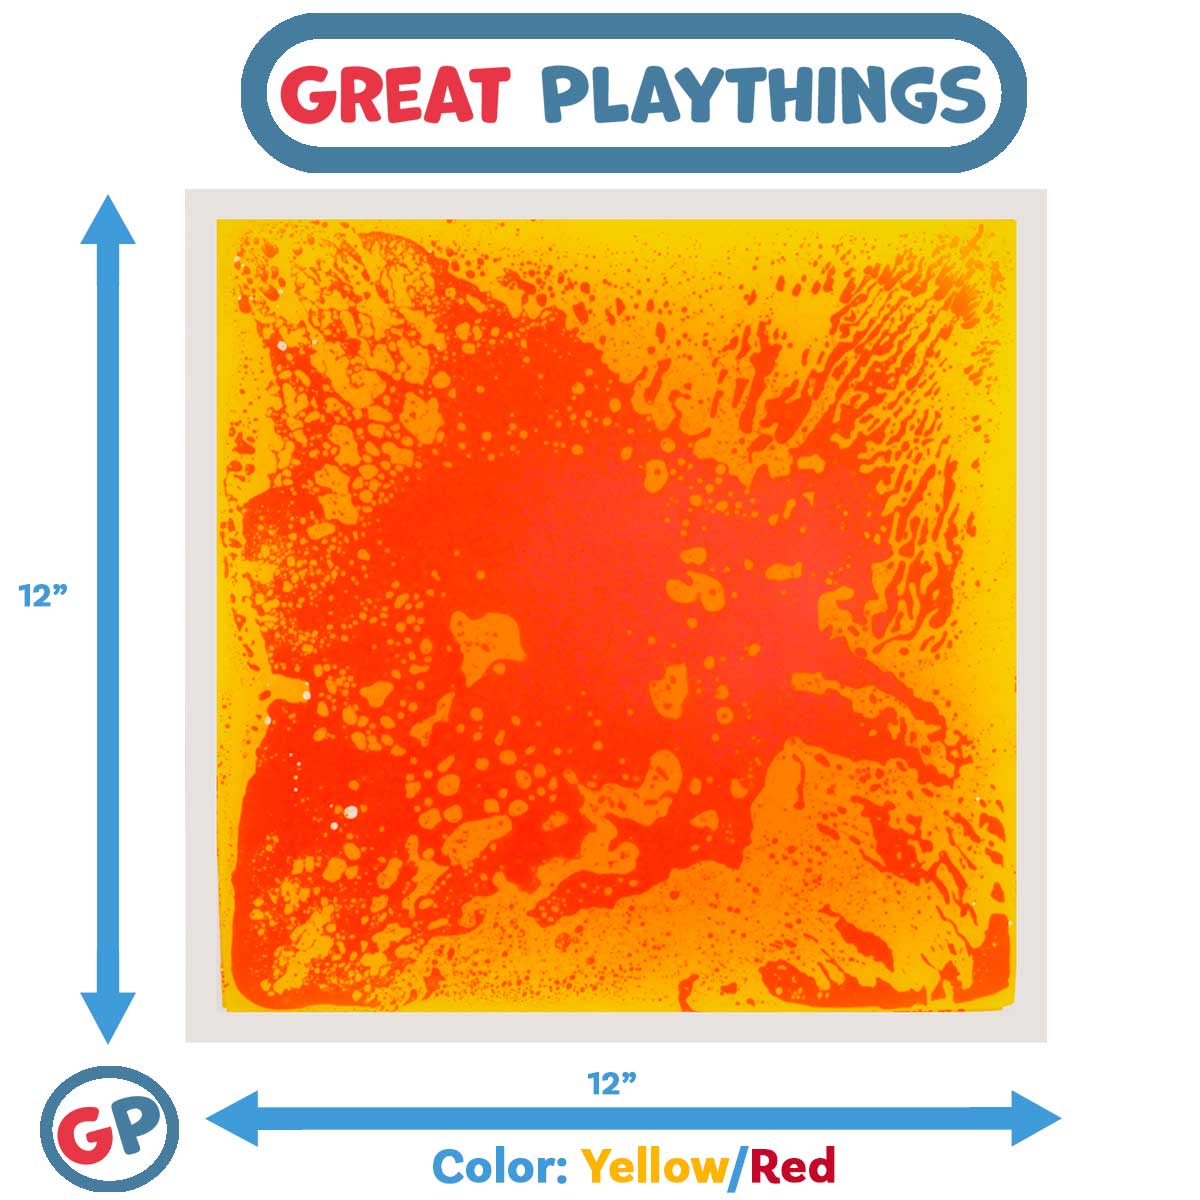 Great Playthings-11.8" Square Liquid Sensory Floor Tile - Box of 6 Yellow/Red Tiles-GP1127